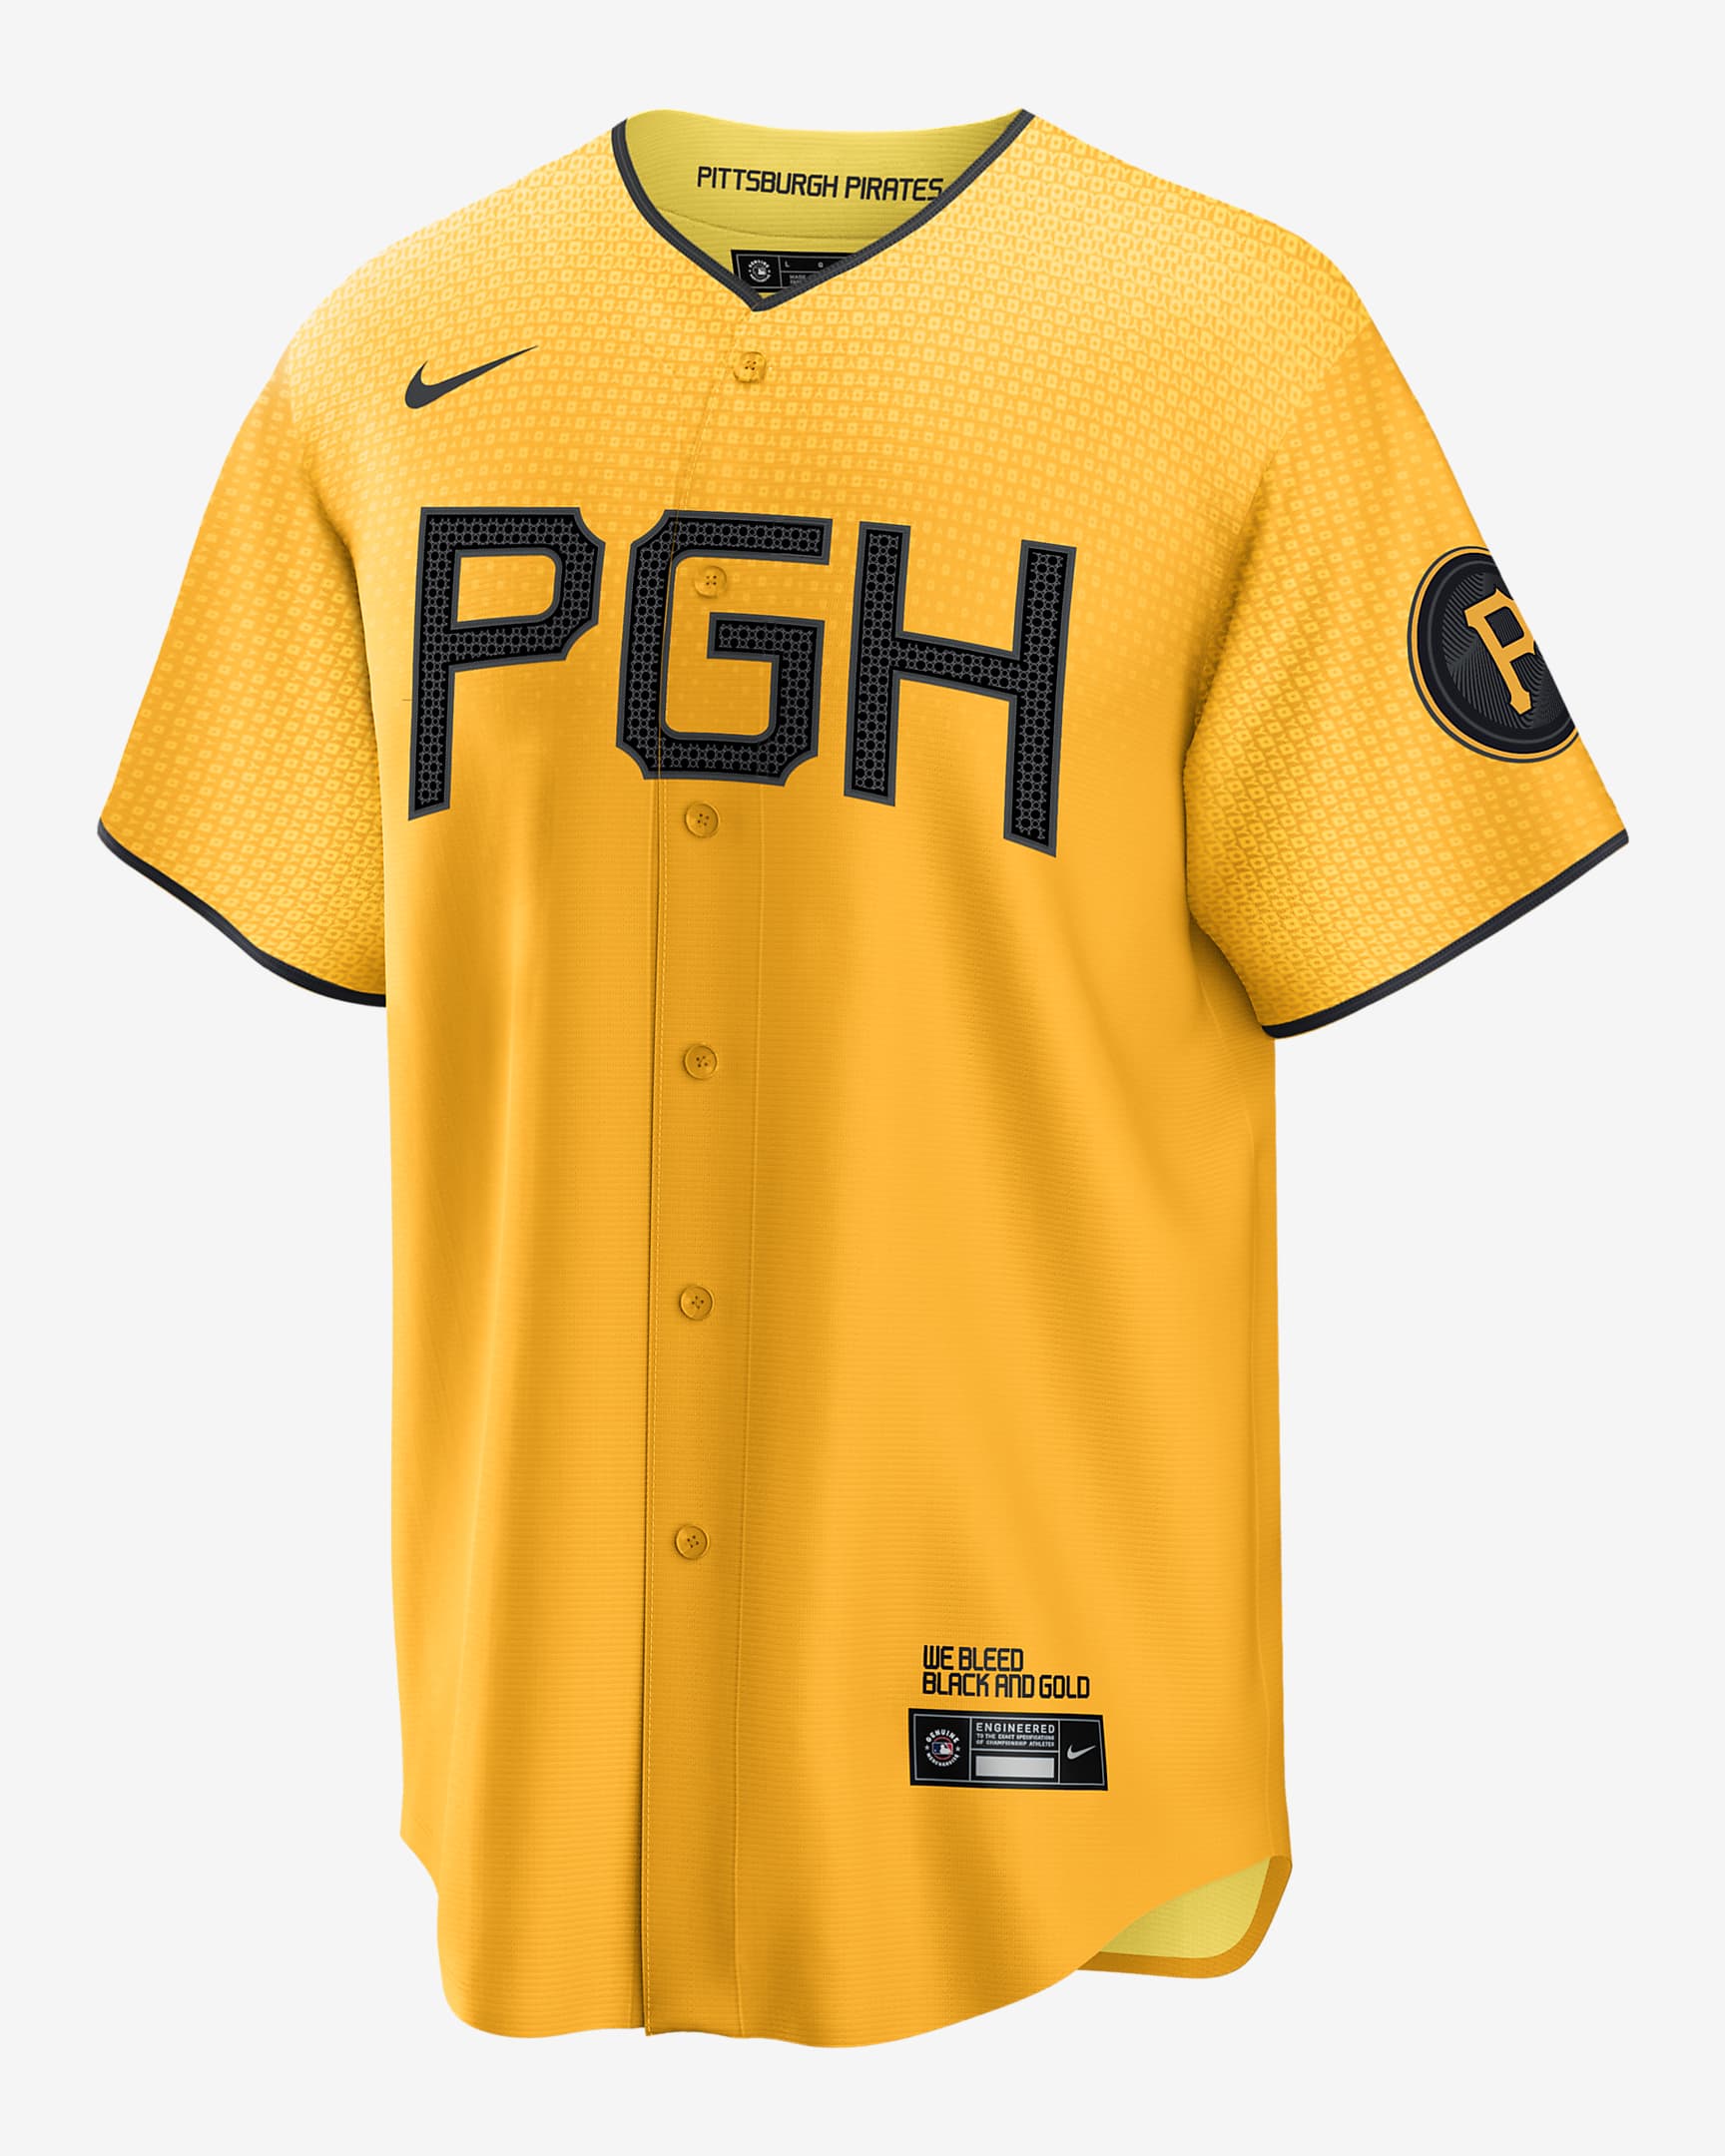 MLB Pittsburgh Pirates City Connect (Willie Stargell) Men's Replica